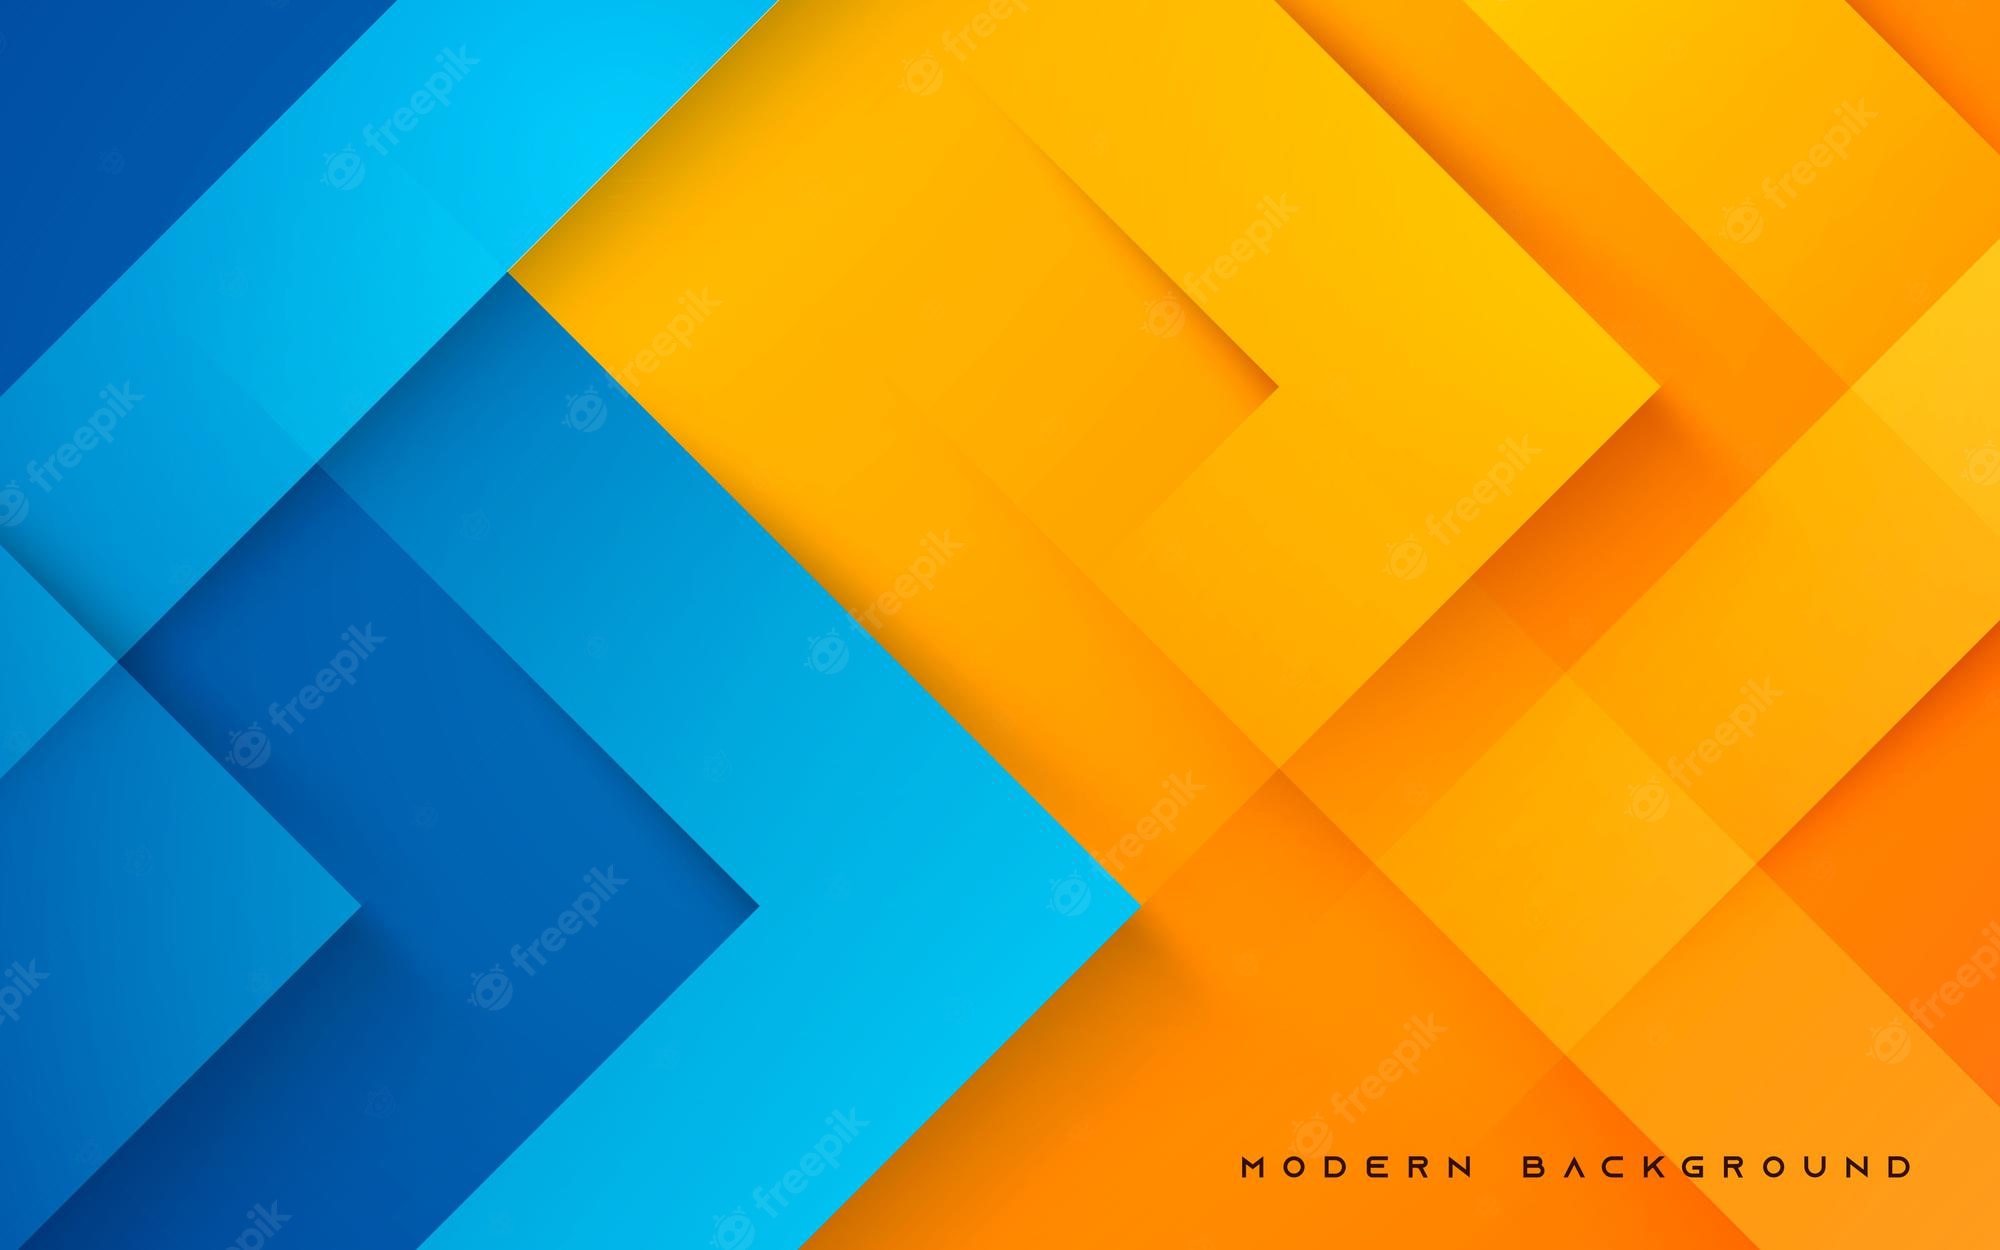 Cool Simple Background Designs